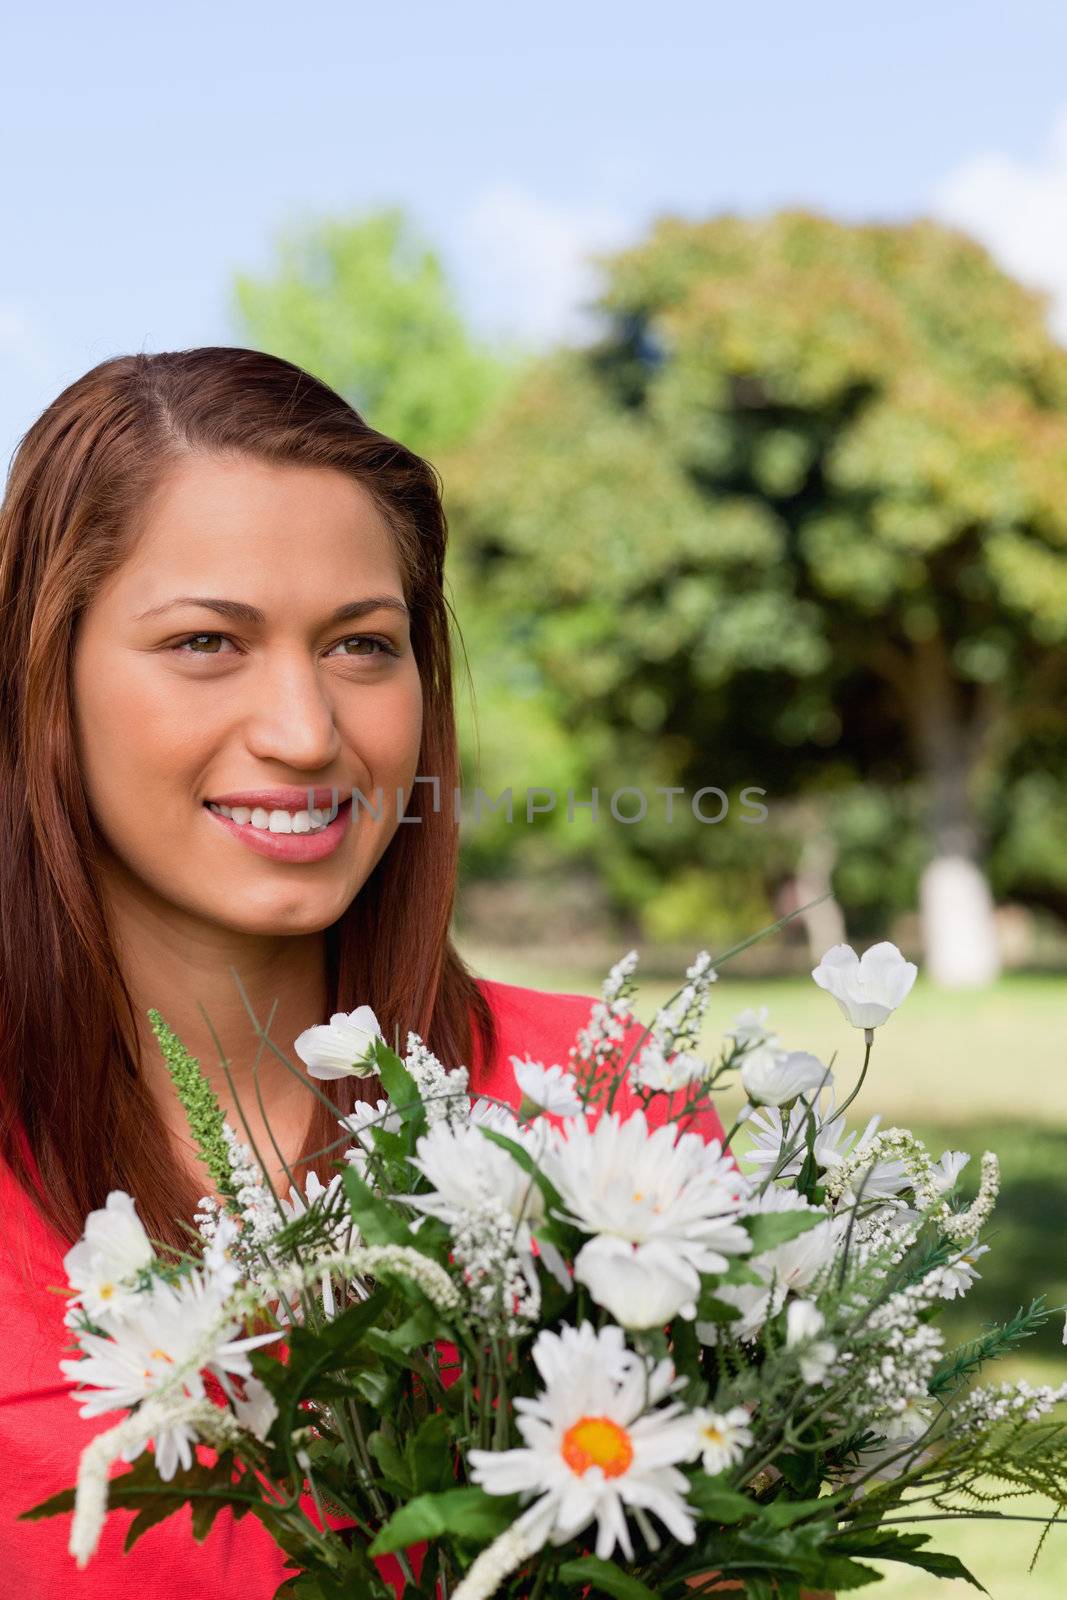 Woman looking towards the side while holding a bunch of flowers and and standing in an open area surrounded by trees